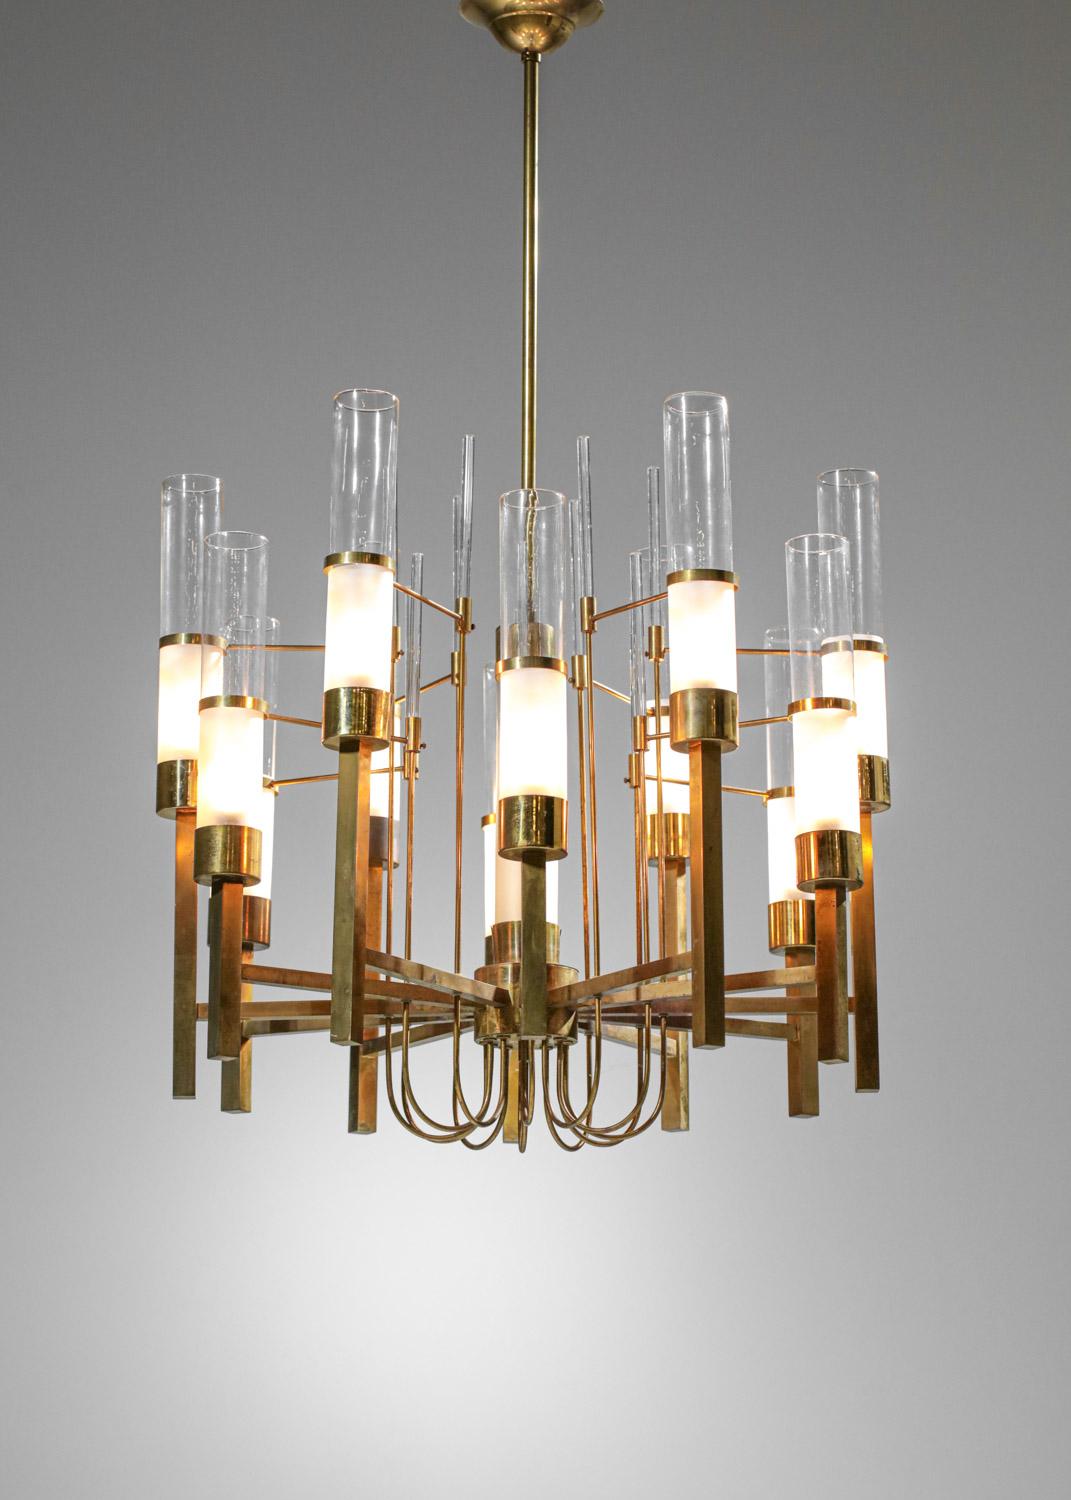 Mid-20th Century Original Italian Chandelier by Gaetano Sciolari 1960s in Brass and Glass Tubes For Sale